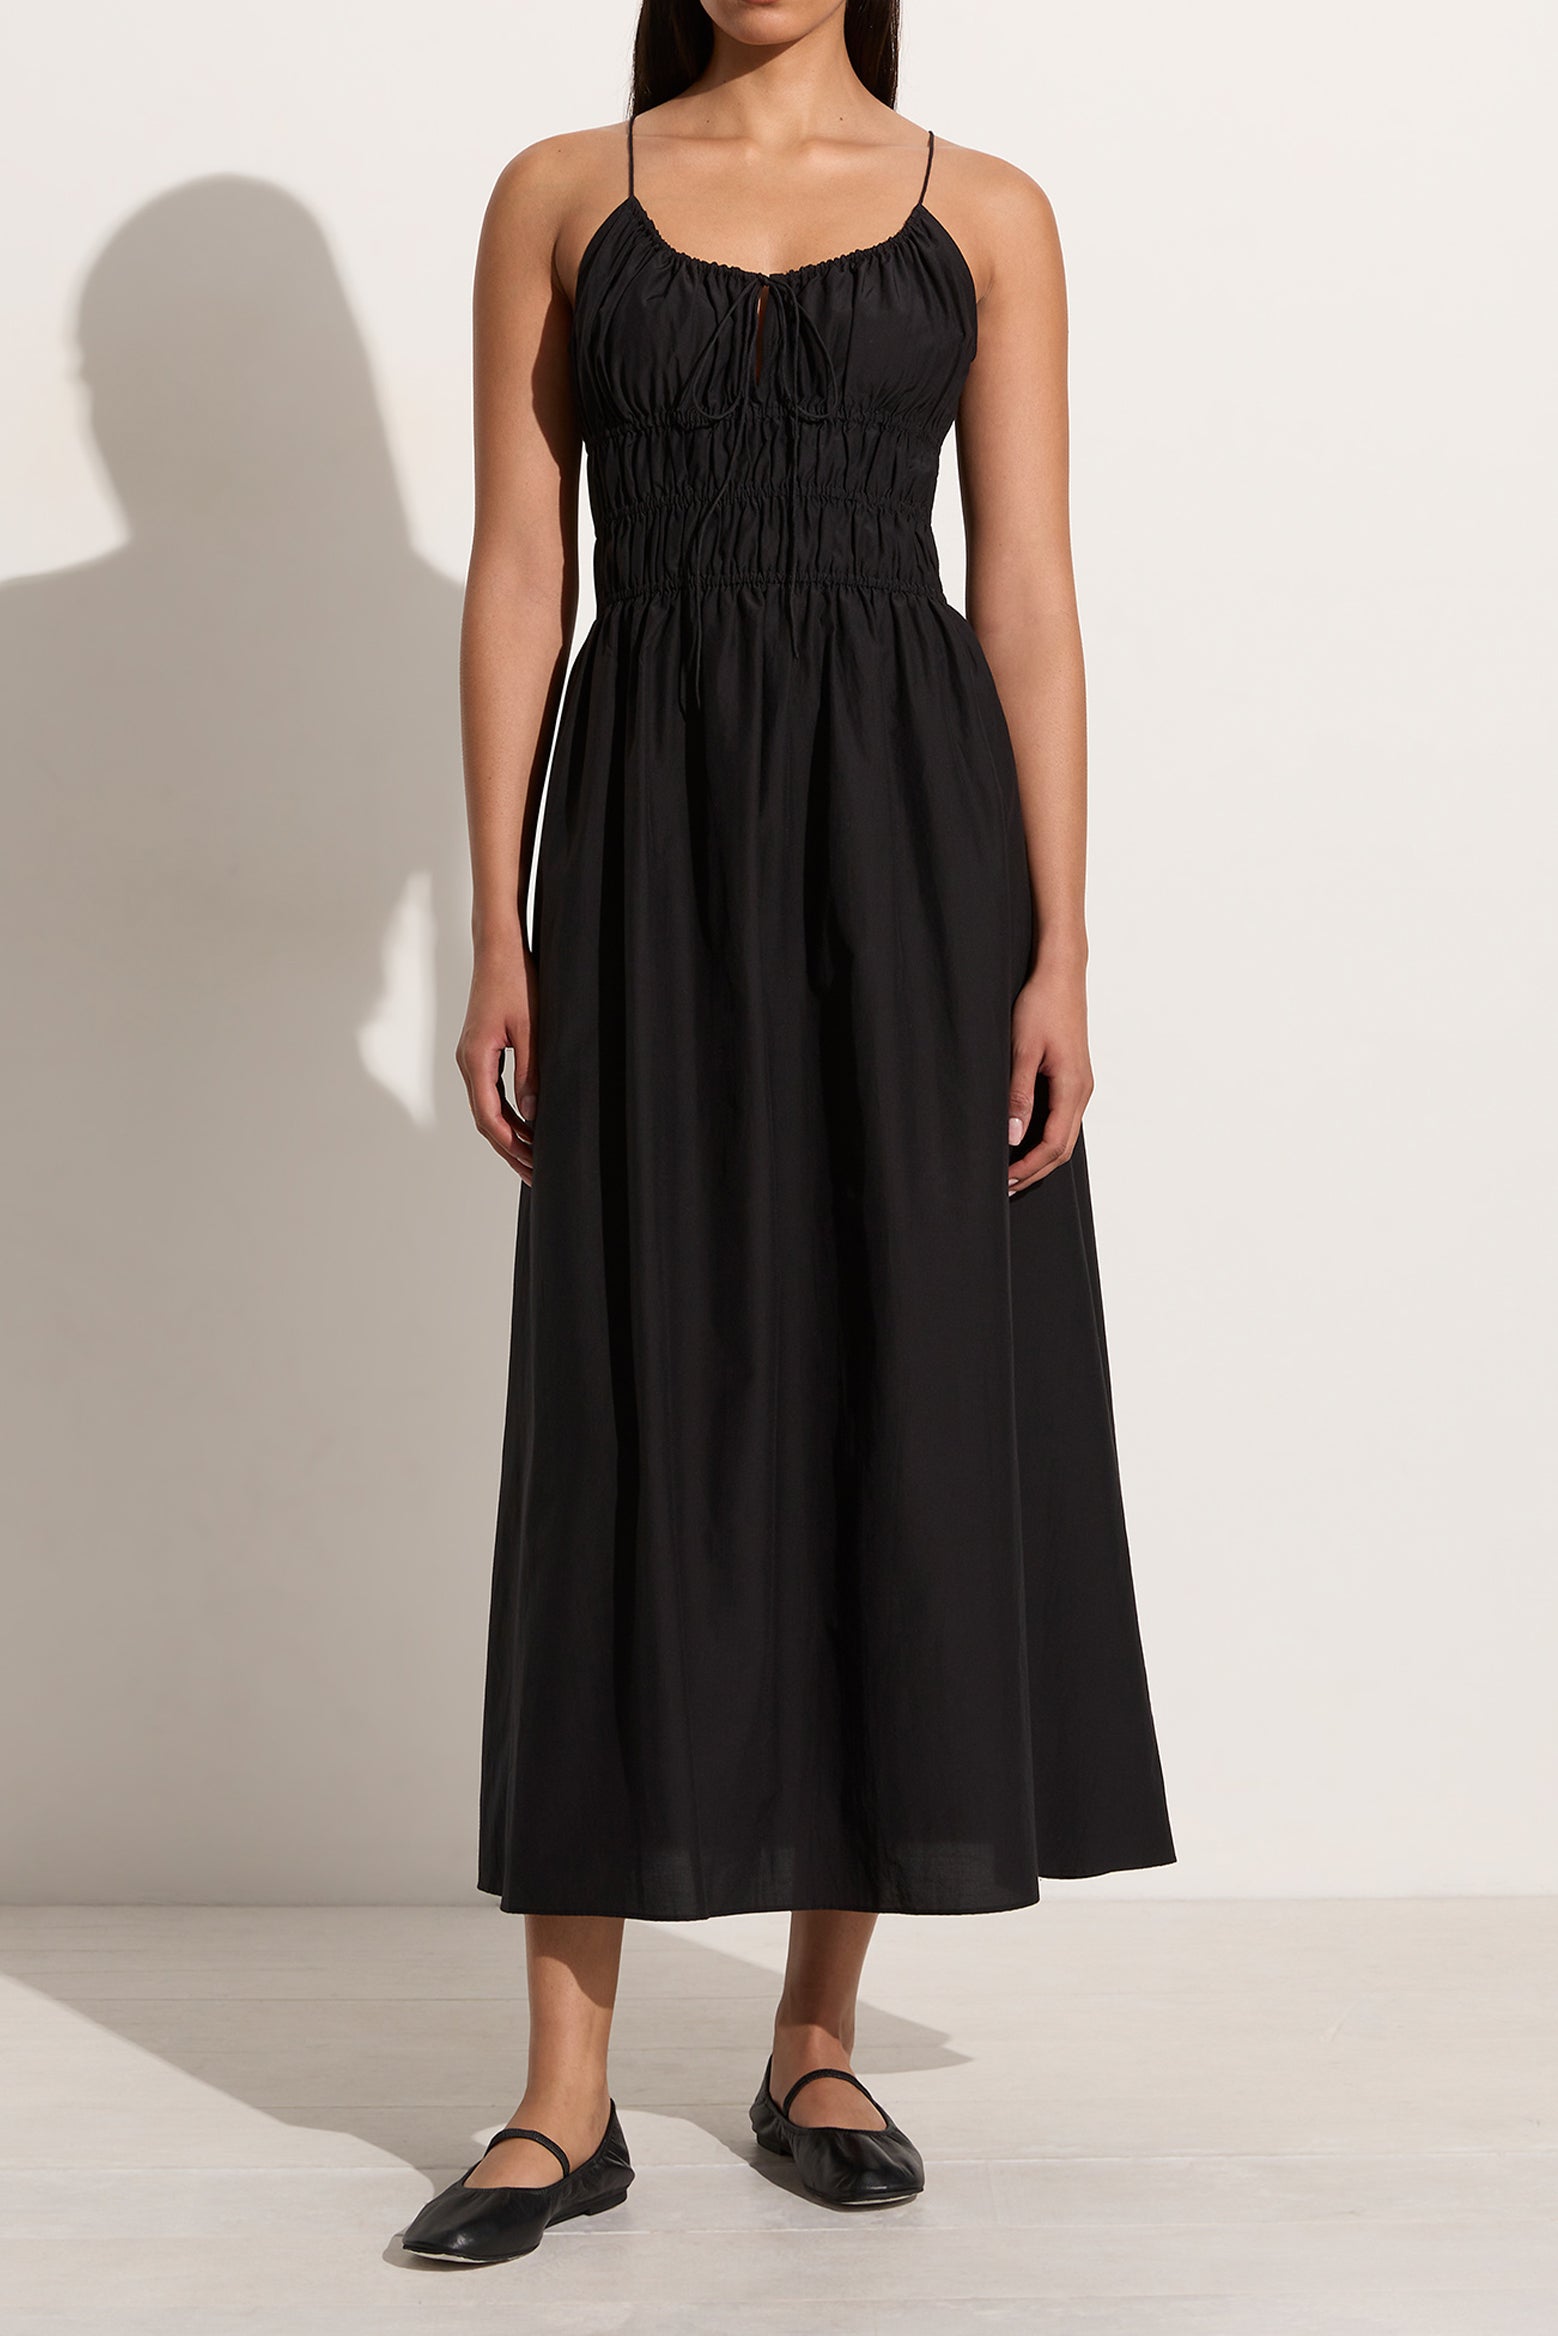 Faithfull The Brand Carinna Midi Dress in Black available at The New Trend Australia. 